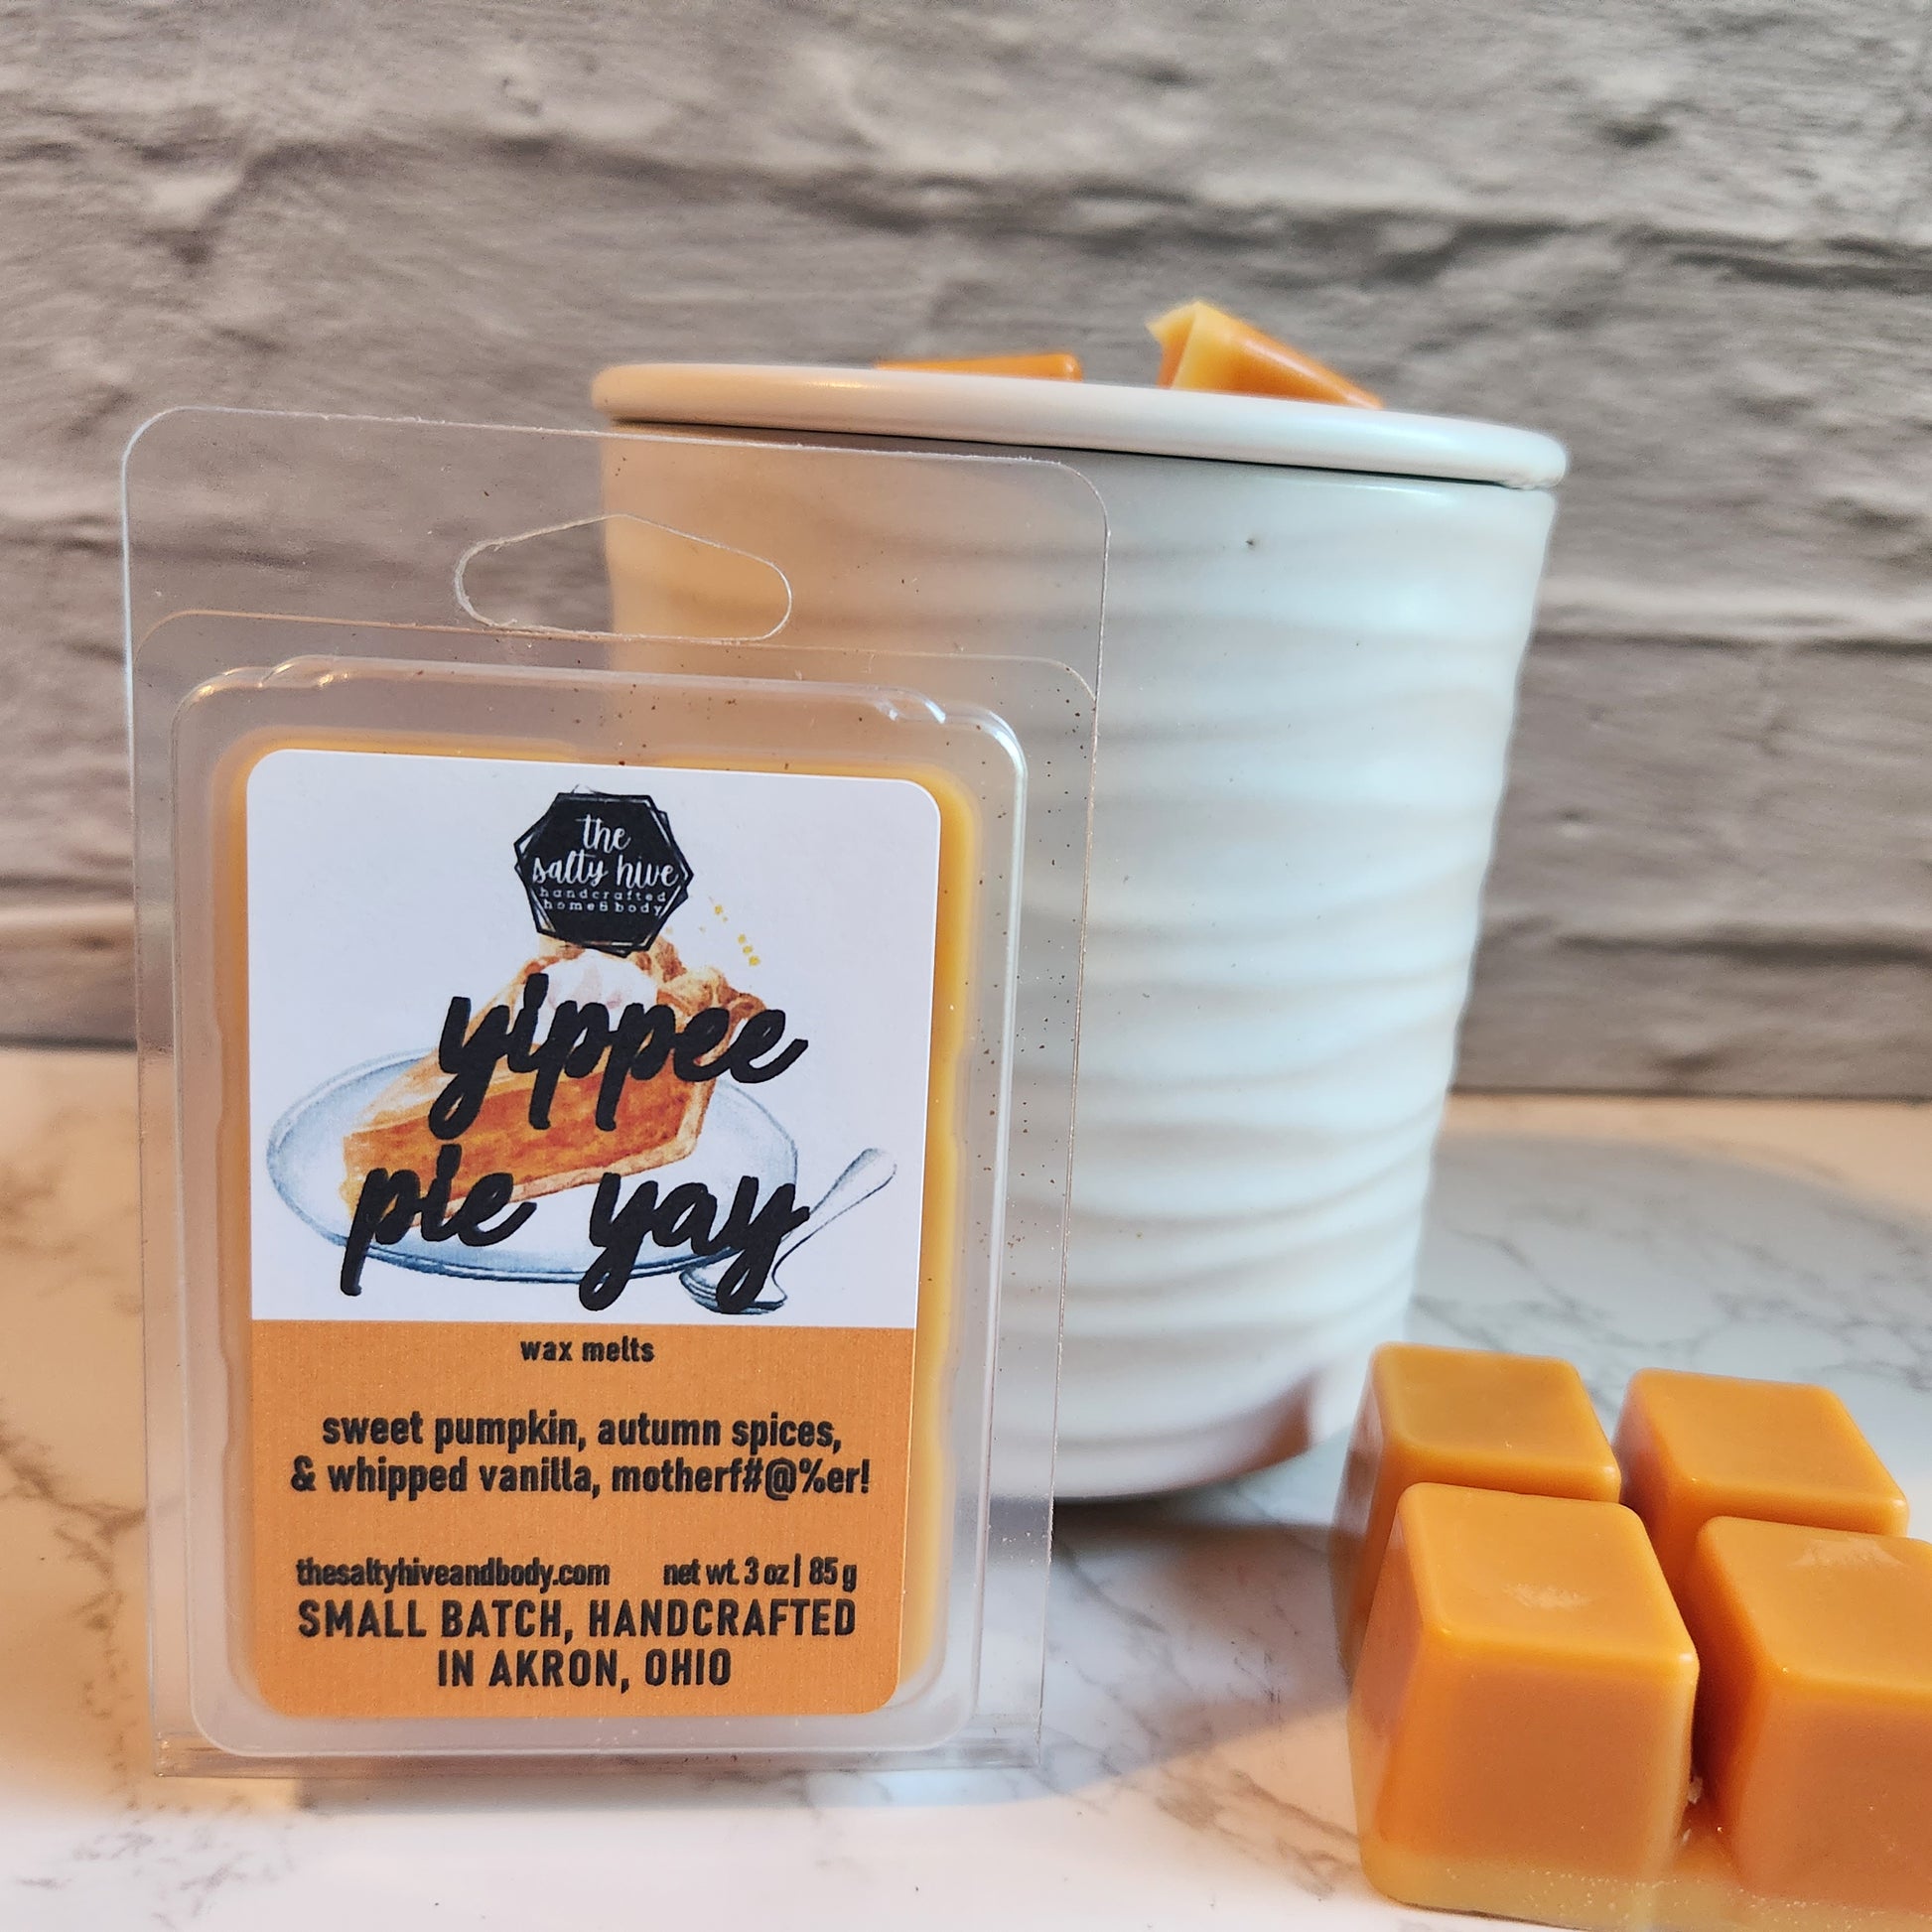 yippee pie yay wax melts - the salty hive